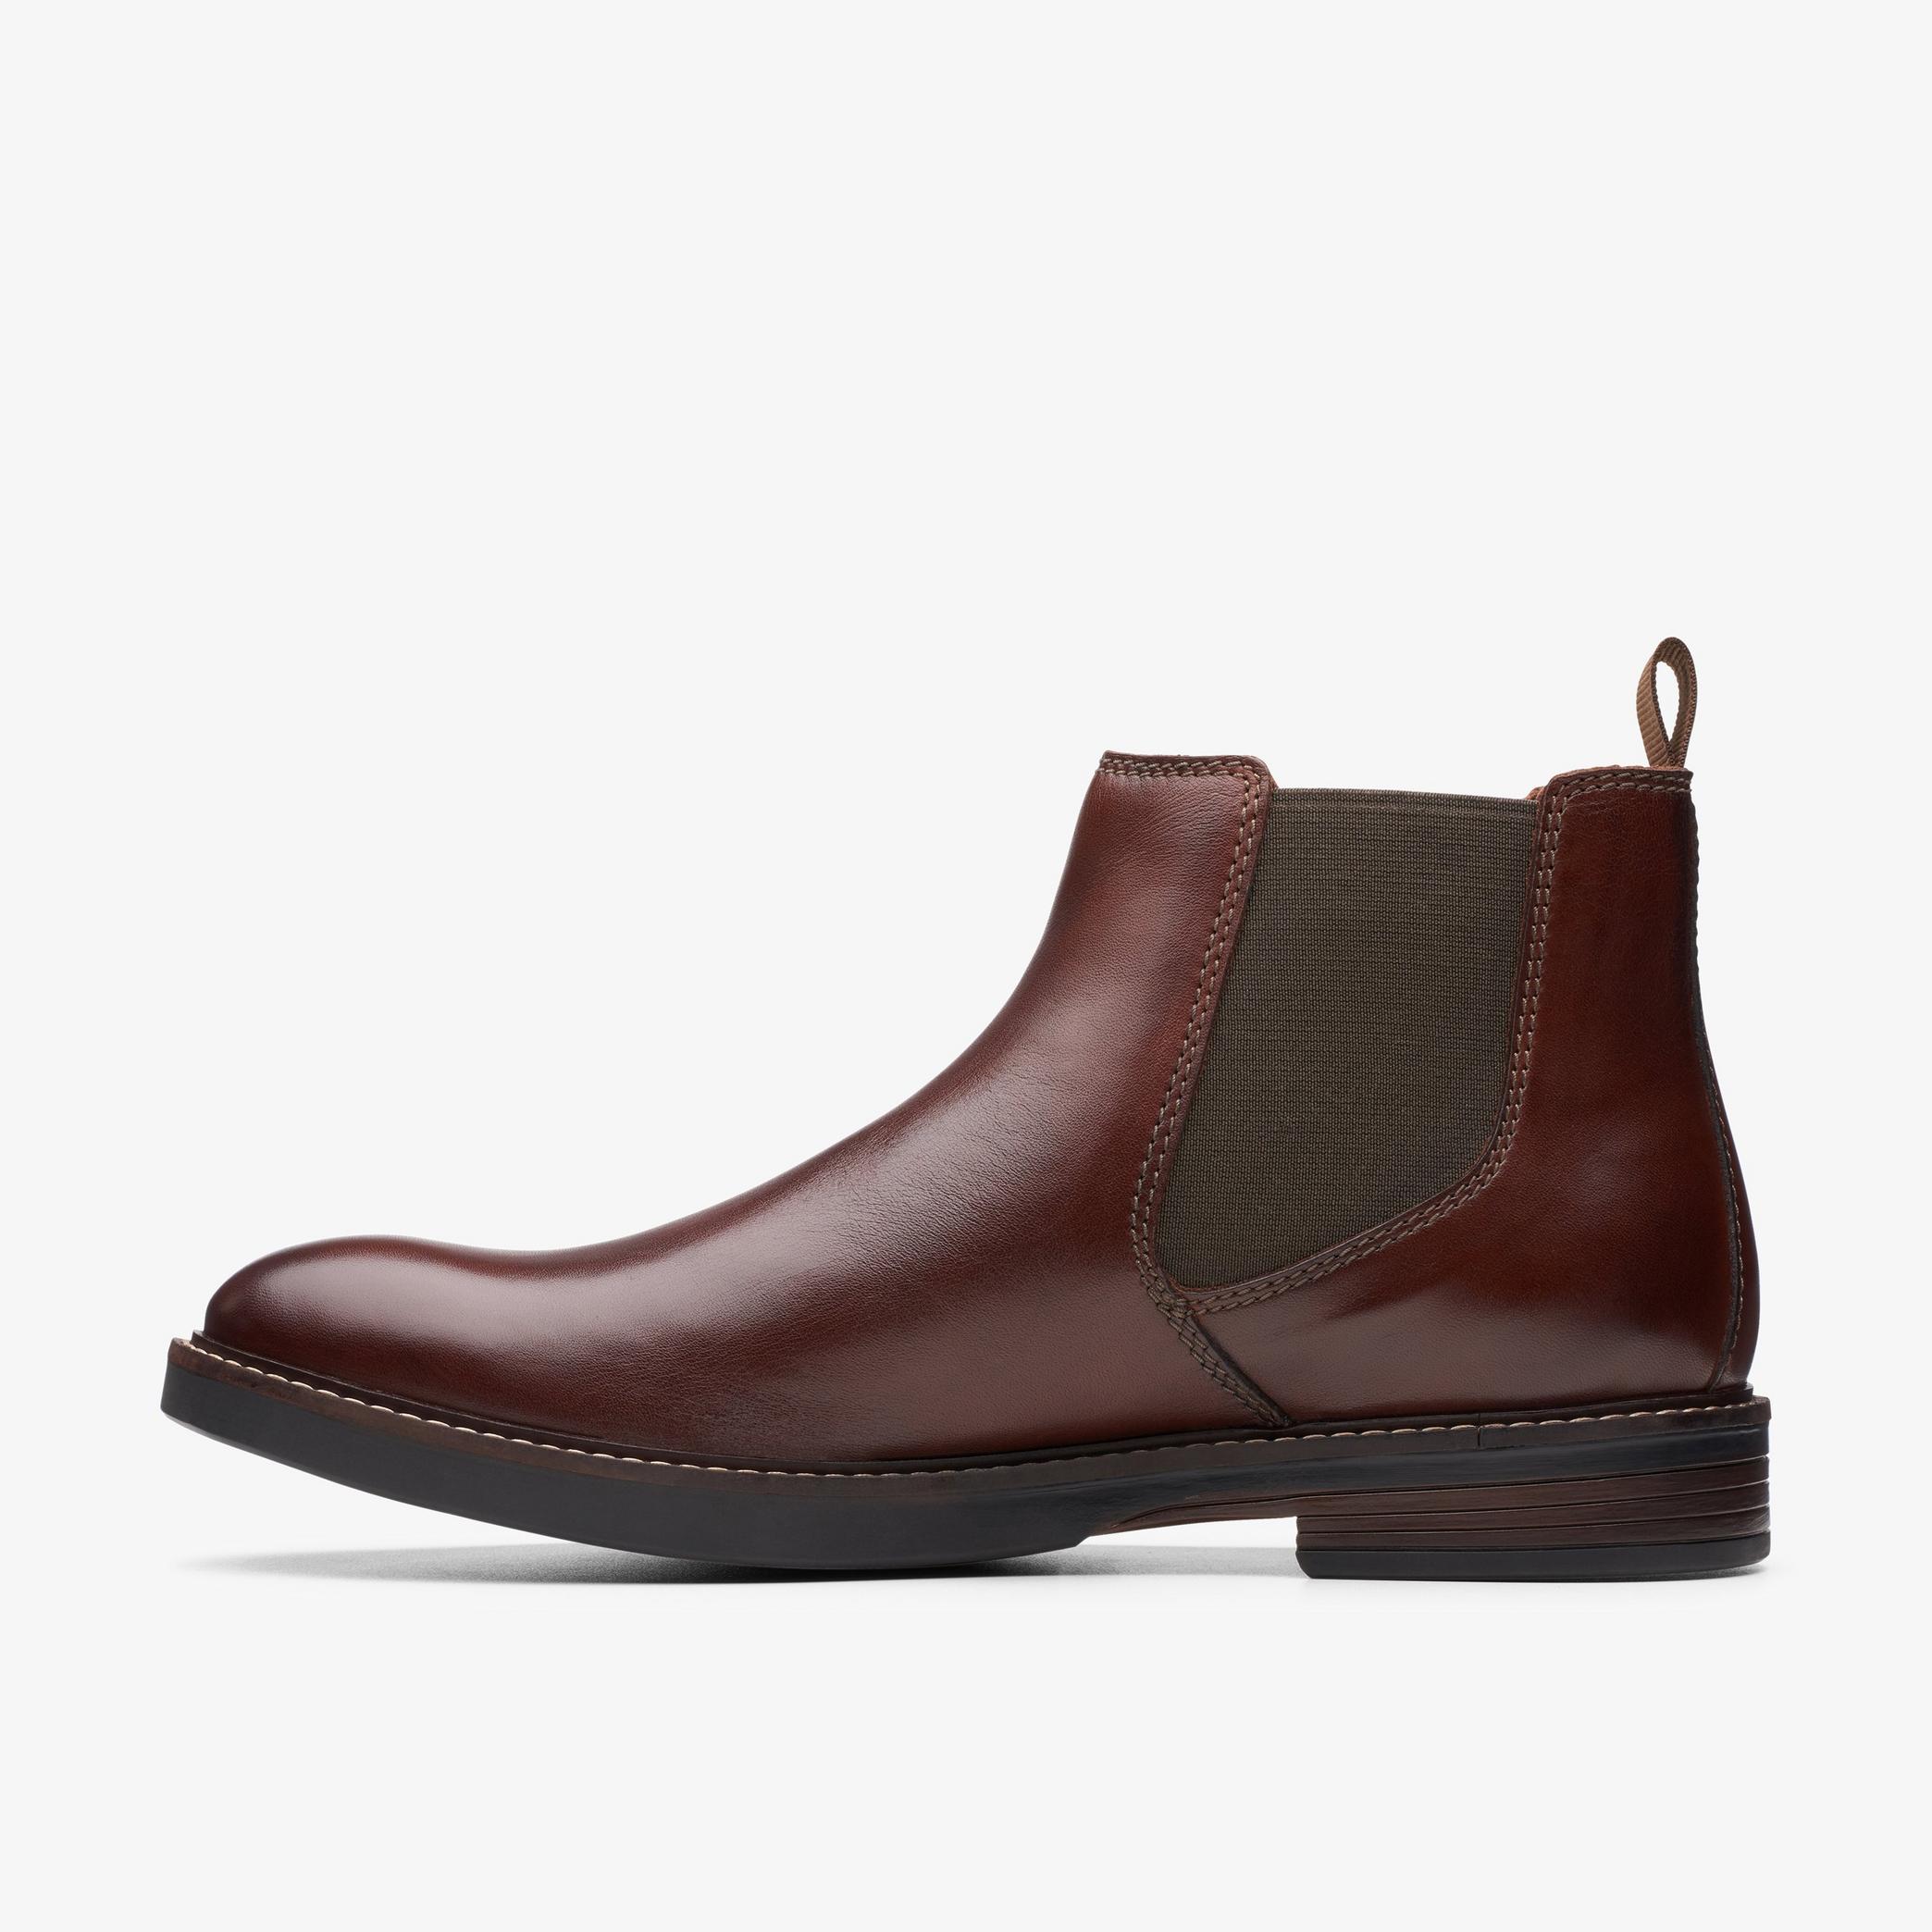 Paulson Up Mahogany Leather Chelsea Boots, view 2 of 6